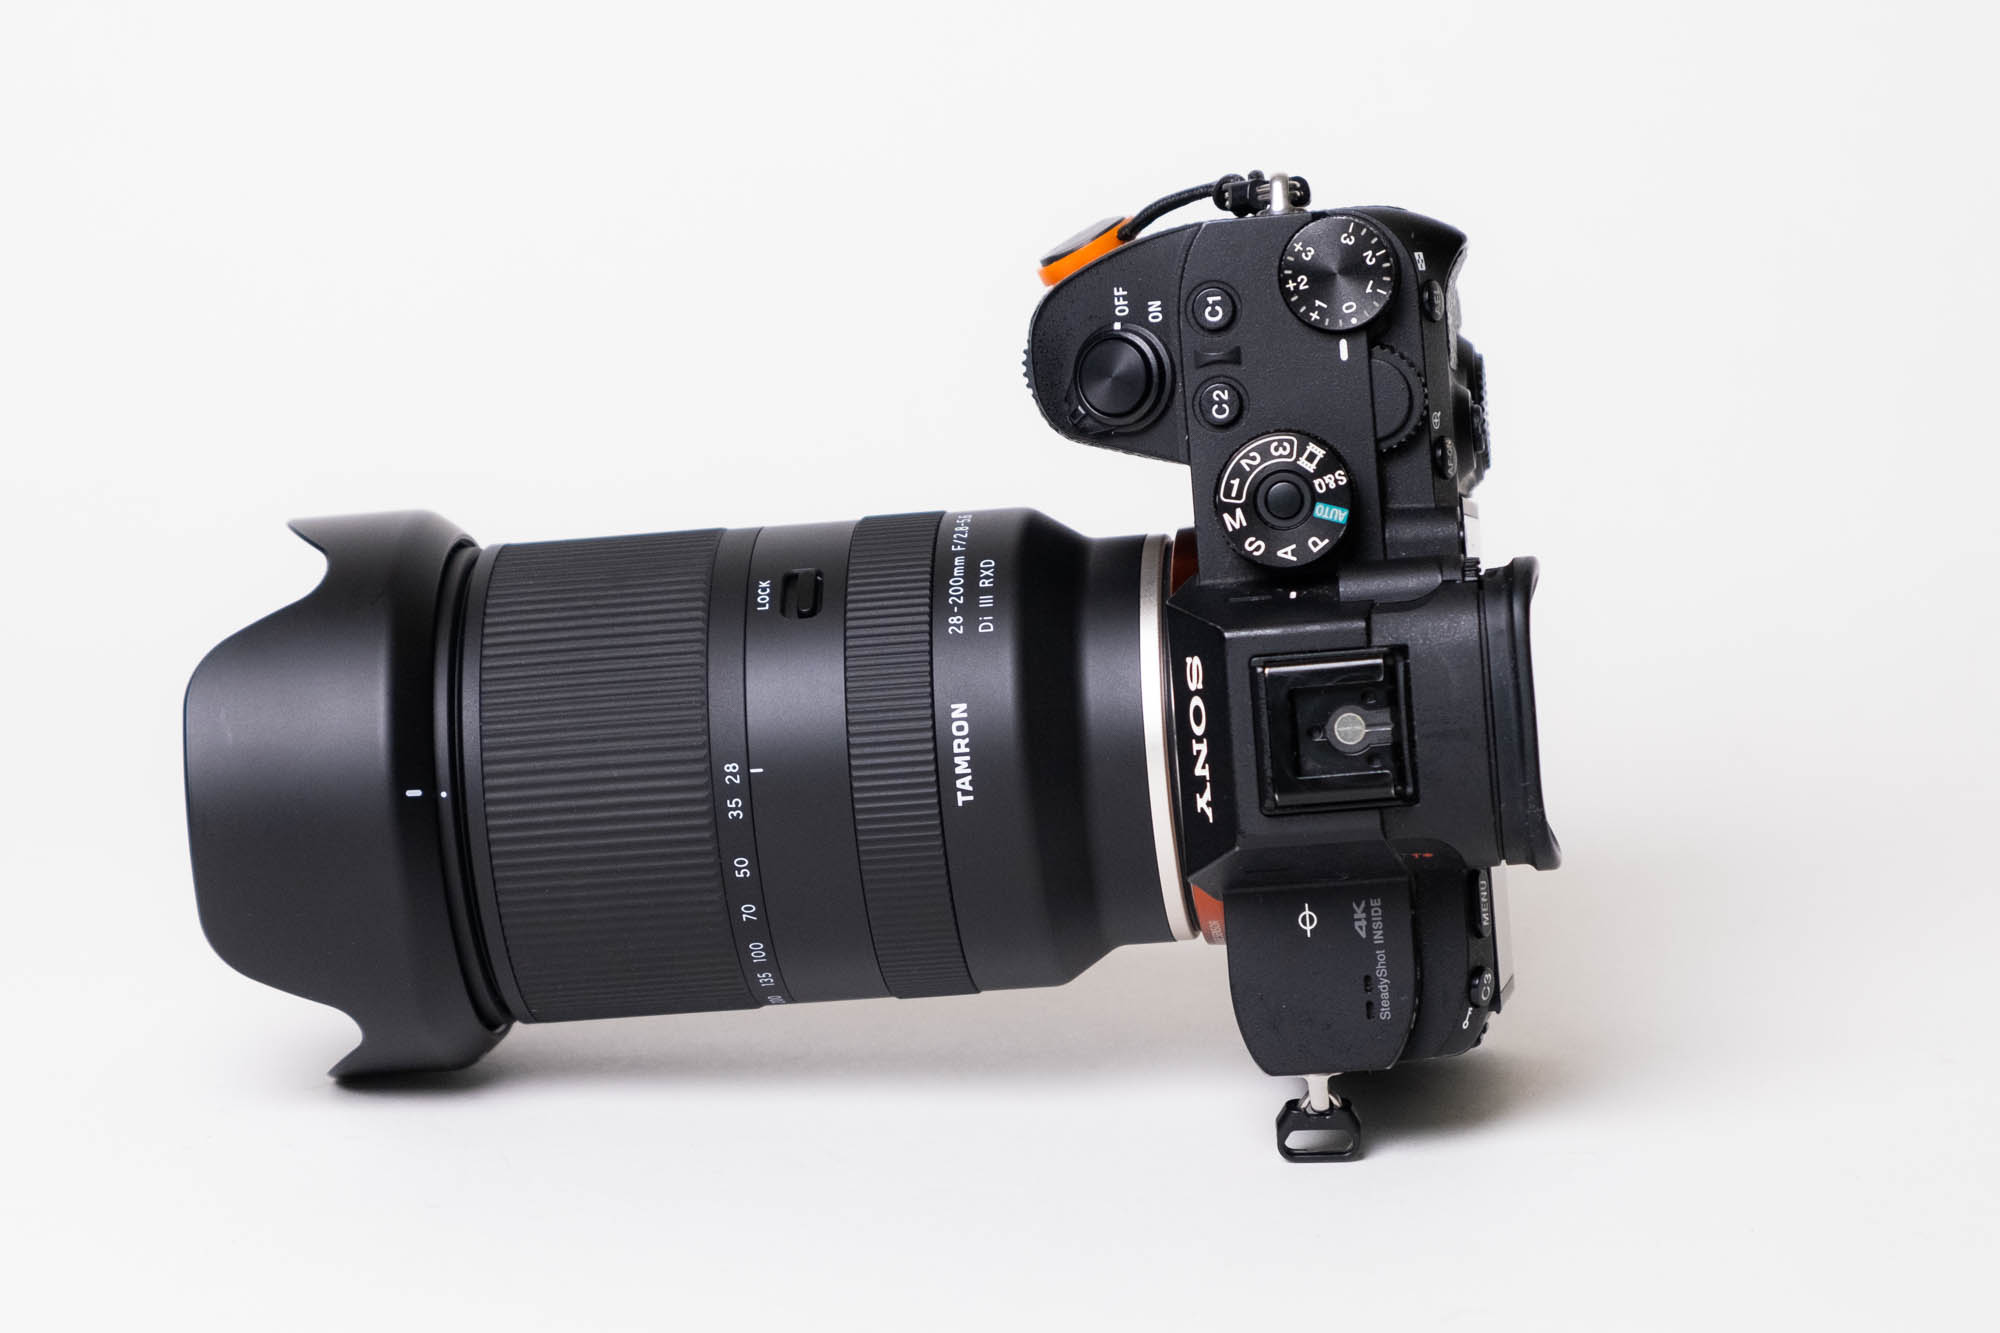 Tamron 28-200mm f/2.8-5.6 Di III RXD Lens for Sony Review – The MilMar Zone